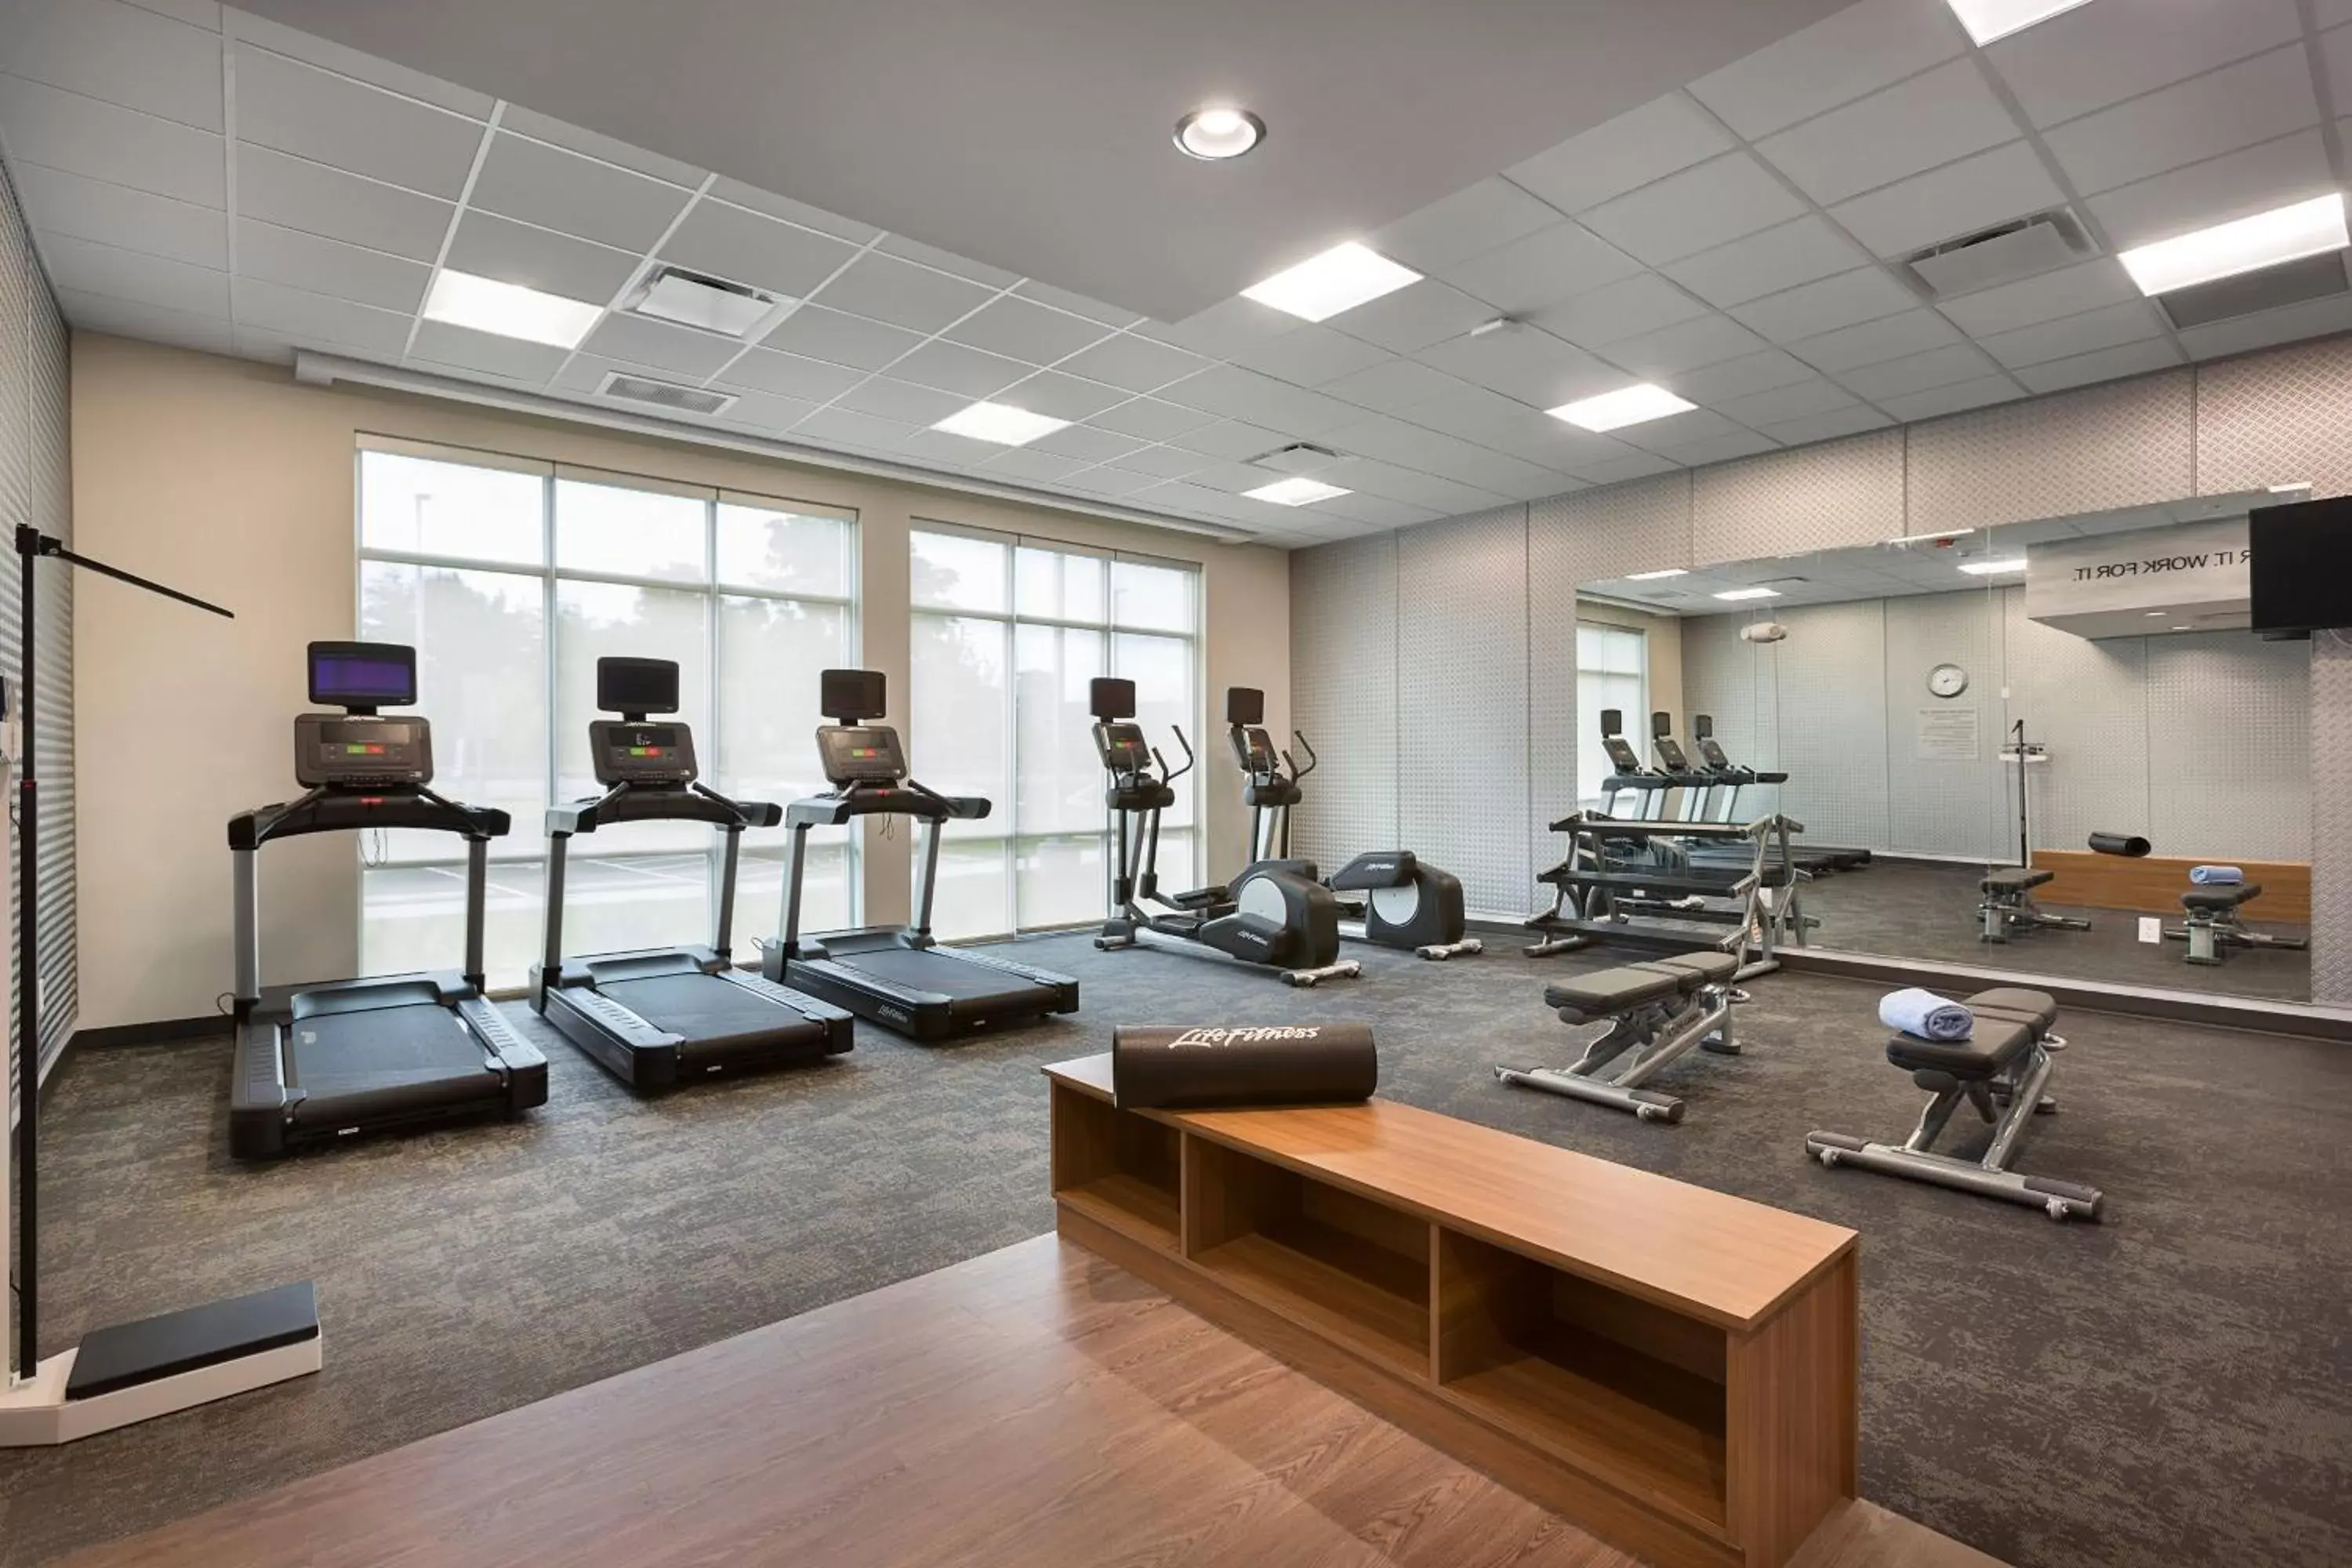 Fitness centre/facilities, Fitness Center/Facilities in Fairfield by Marriott Inn & Suites Statesville